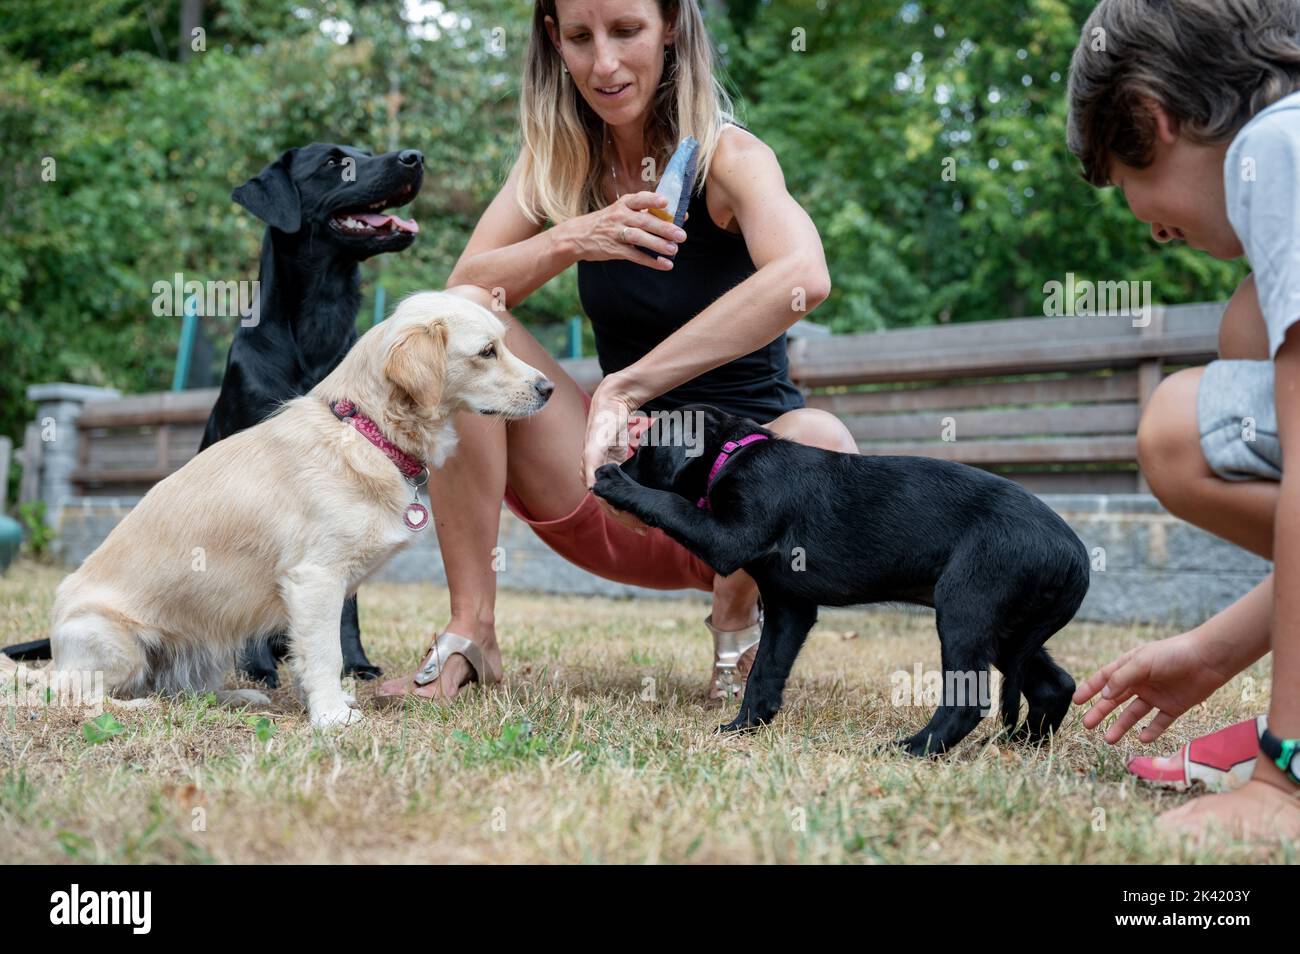 Caucasian female dog owner obedience training her three dogs, two labrador retrievers and a mixed breed, outside in backyard. Stock Photo